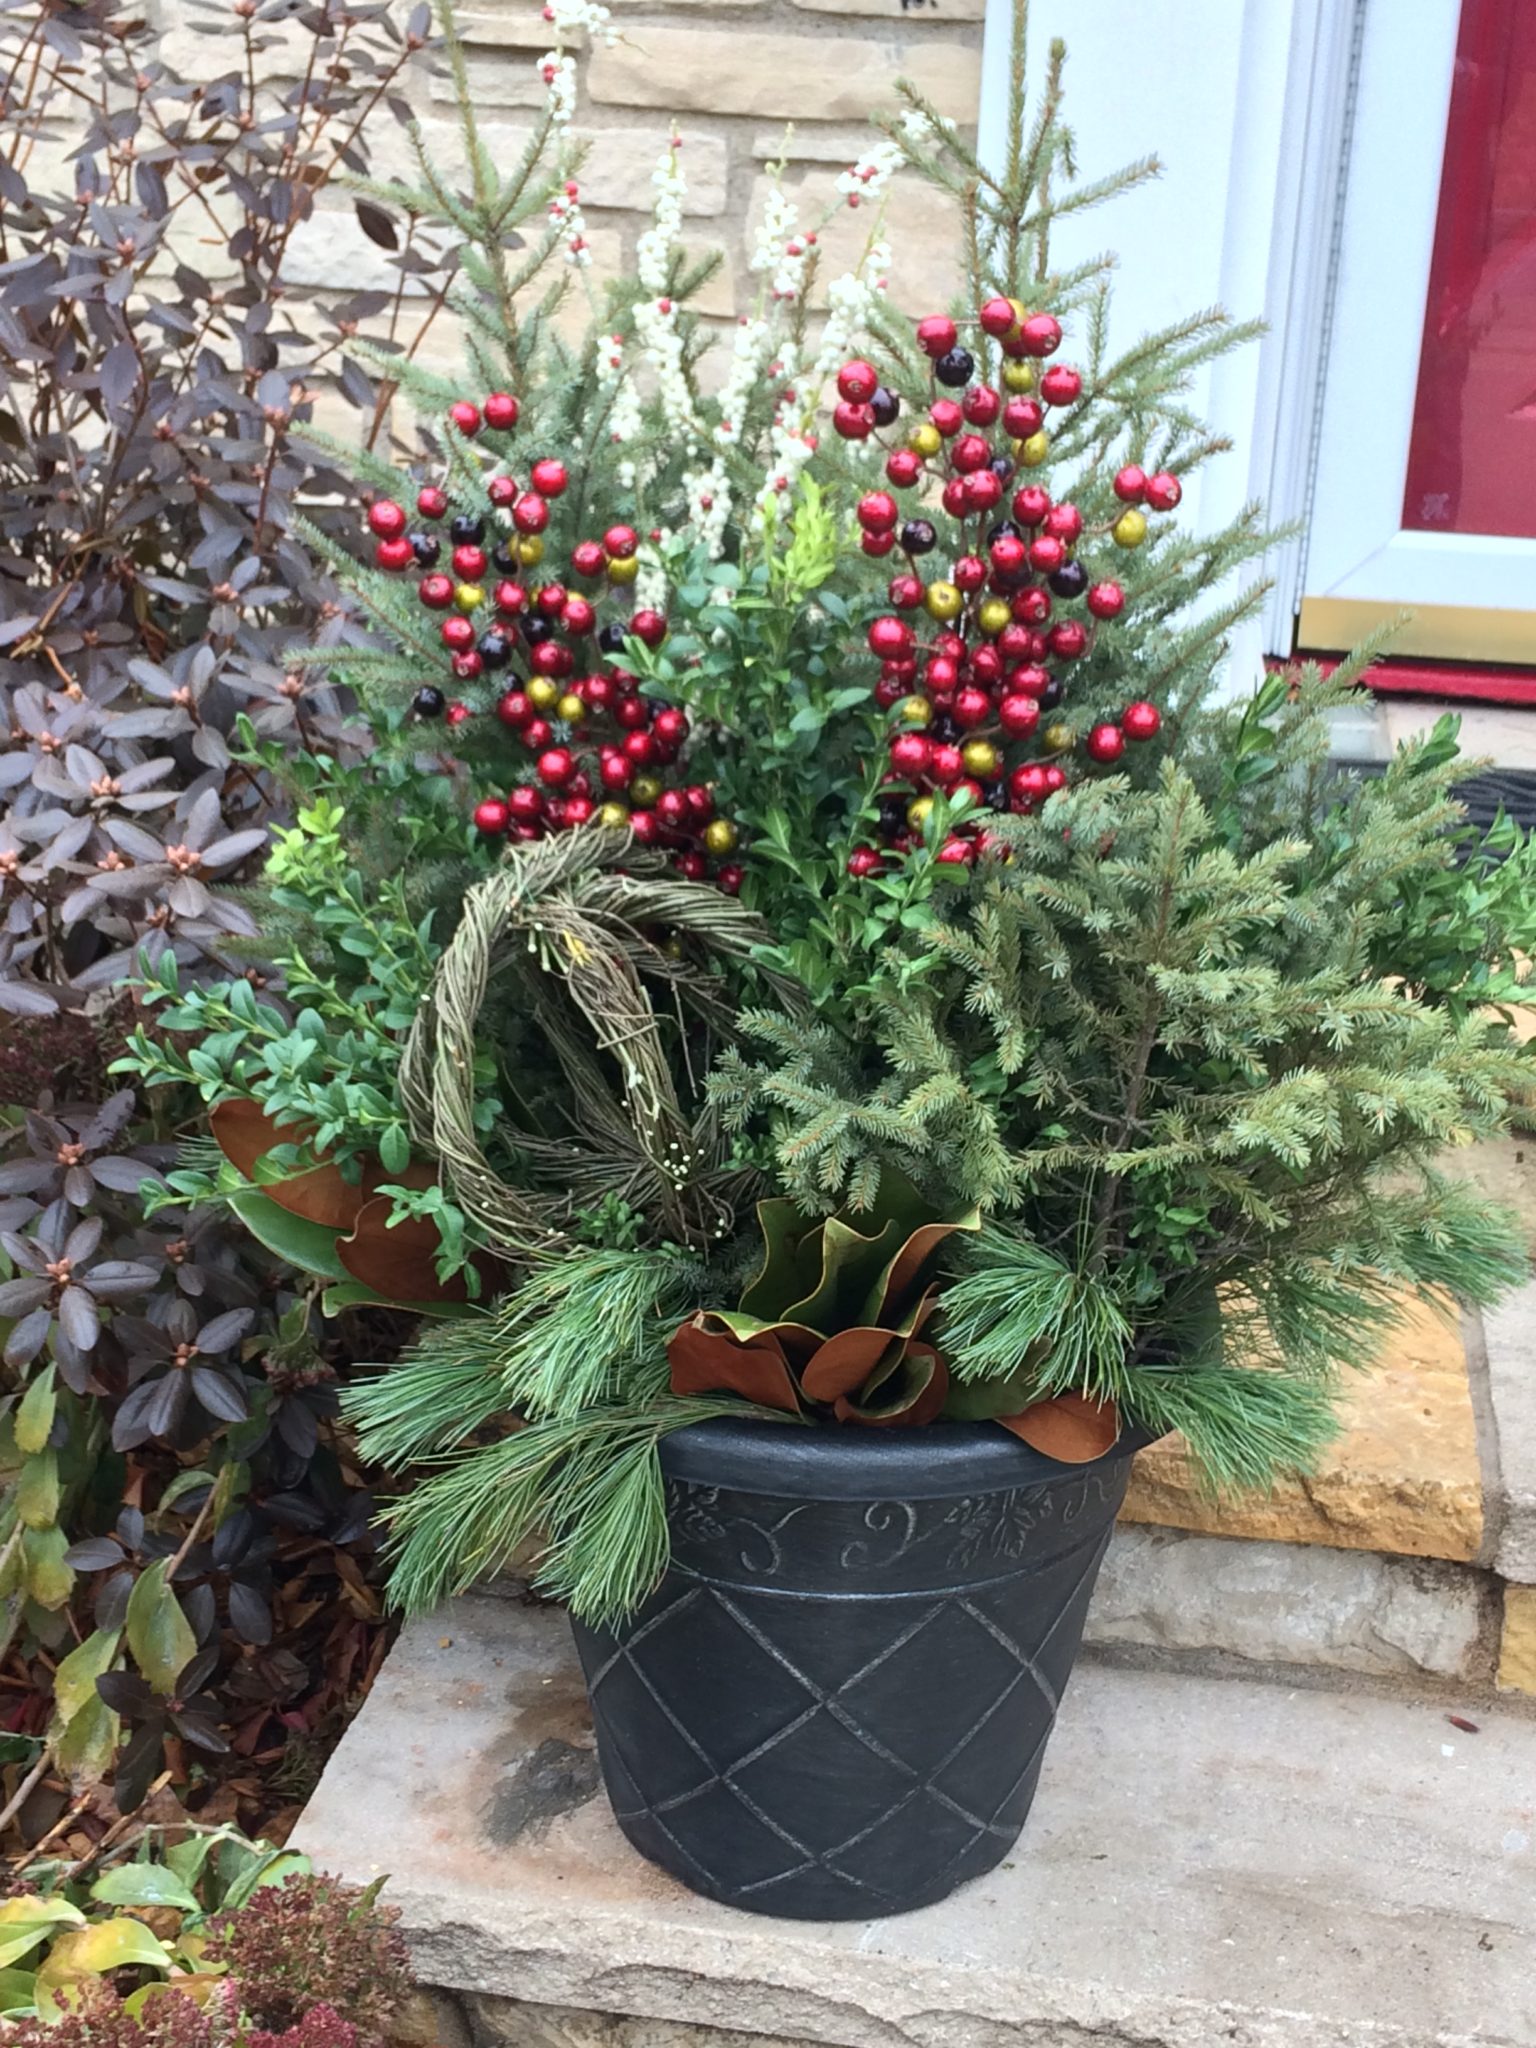 decorative pot with a variety of pine bows and red berries